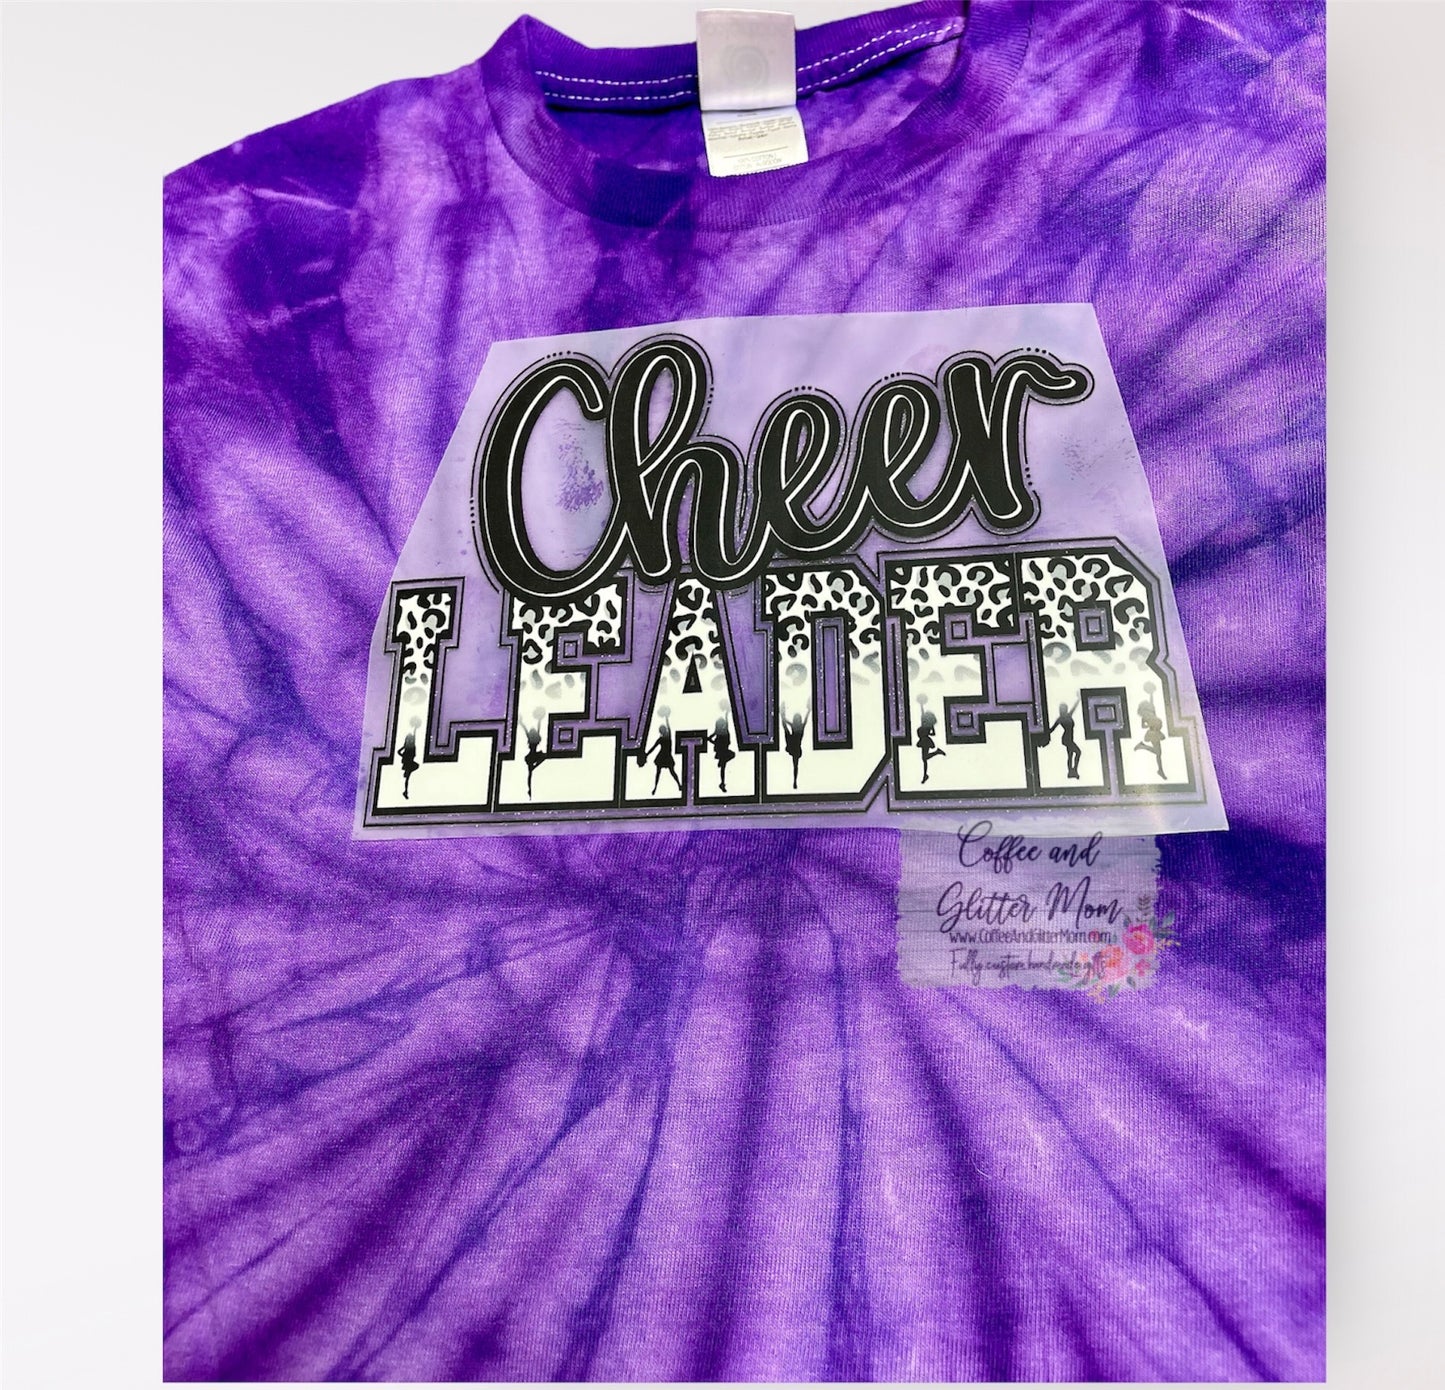 Cheer Leader Youth Pick Your Tee